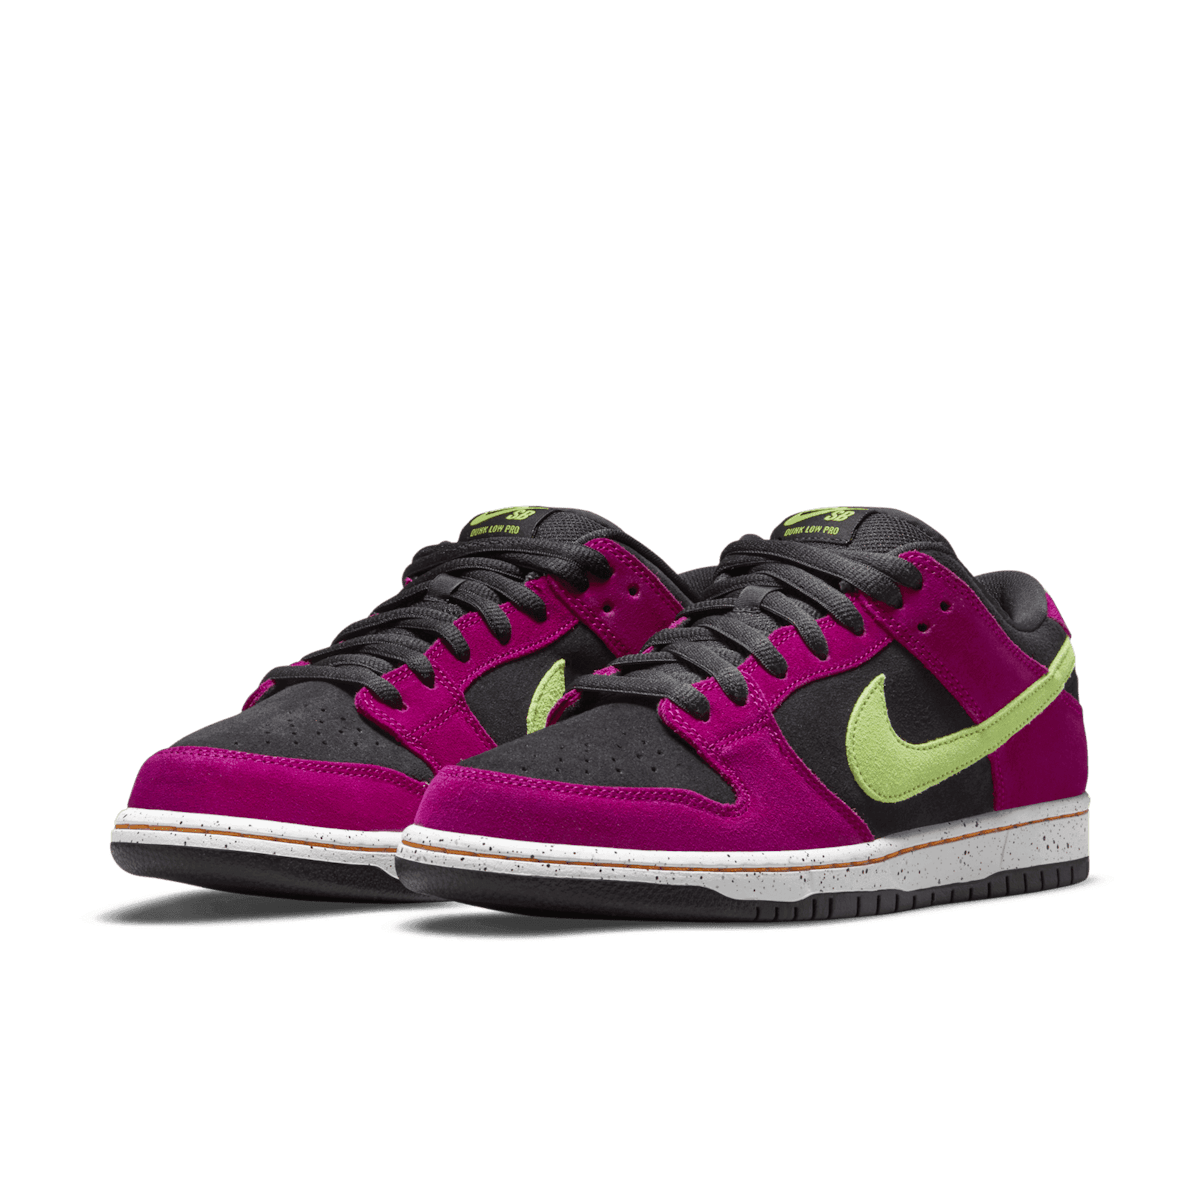 Nike SB Dunk Low Pro Red Plum - BQ6817-501 Raffles and Release Date